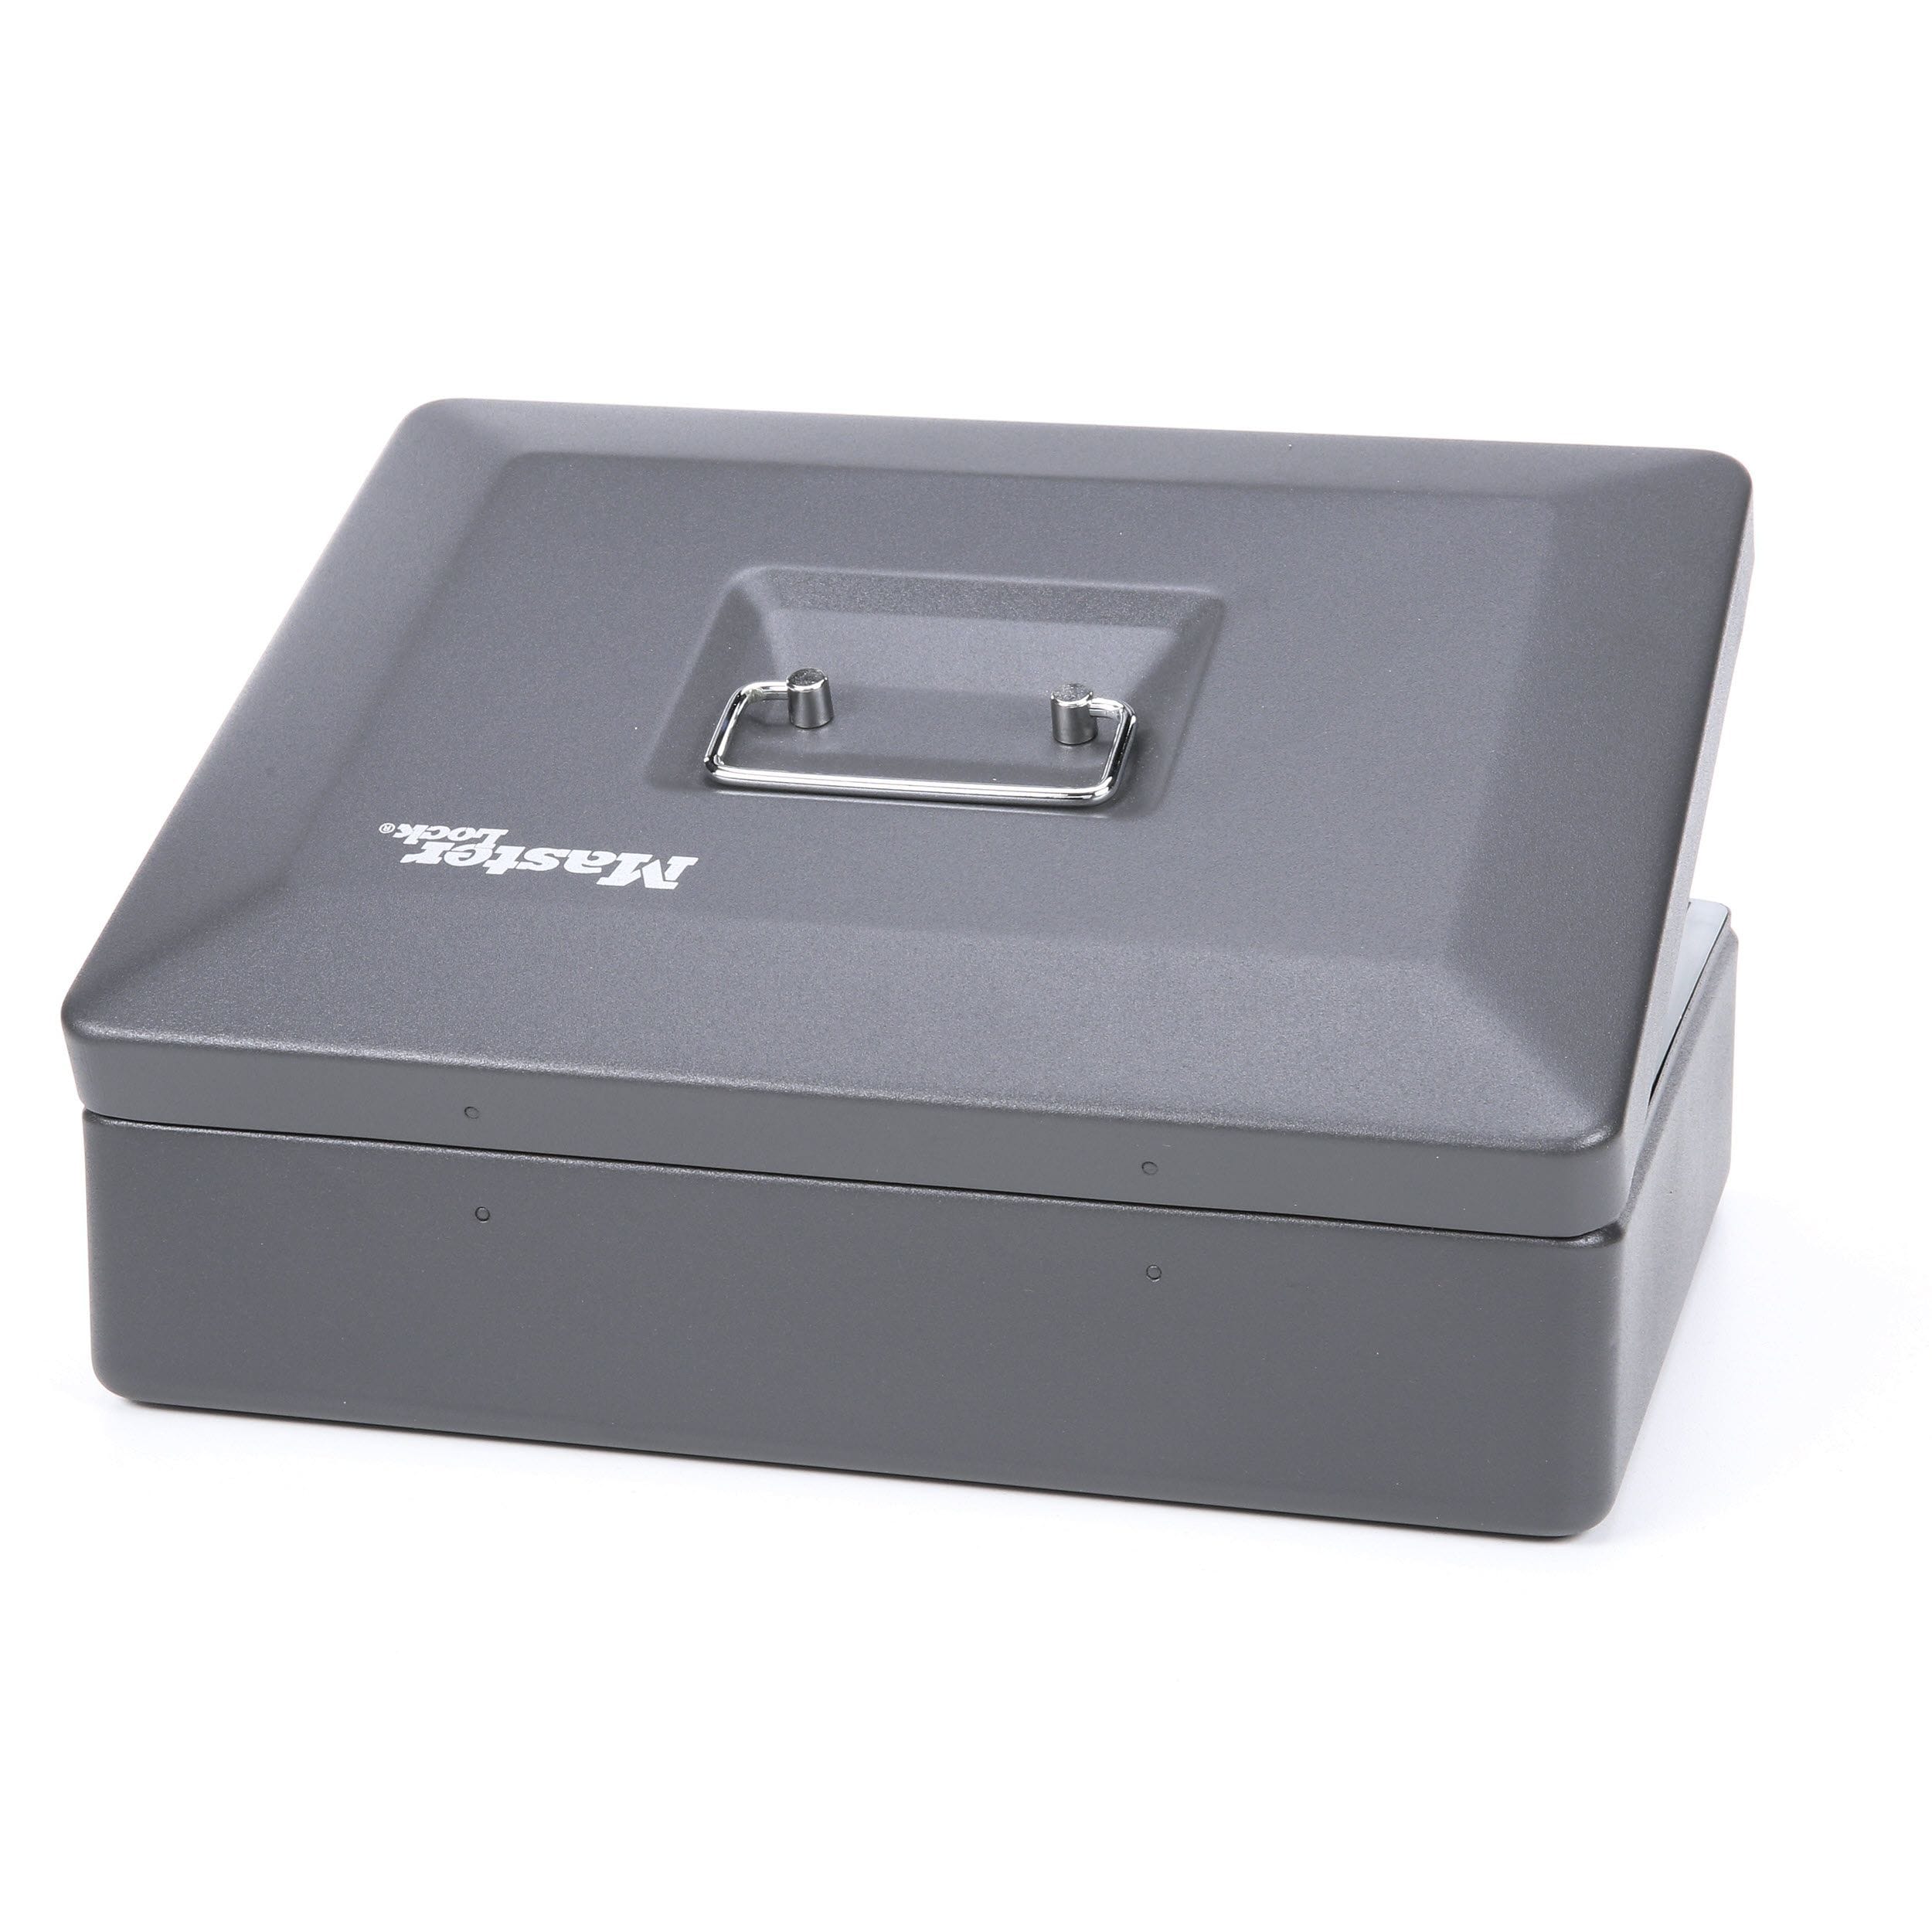 Combination Safe Lock Portable Travel Personal Small Money Plastic Security Box 